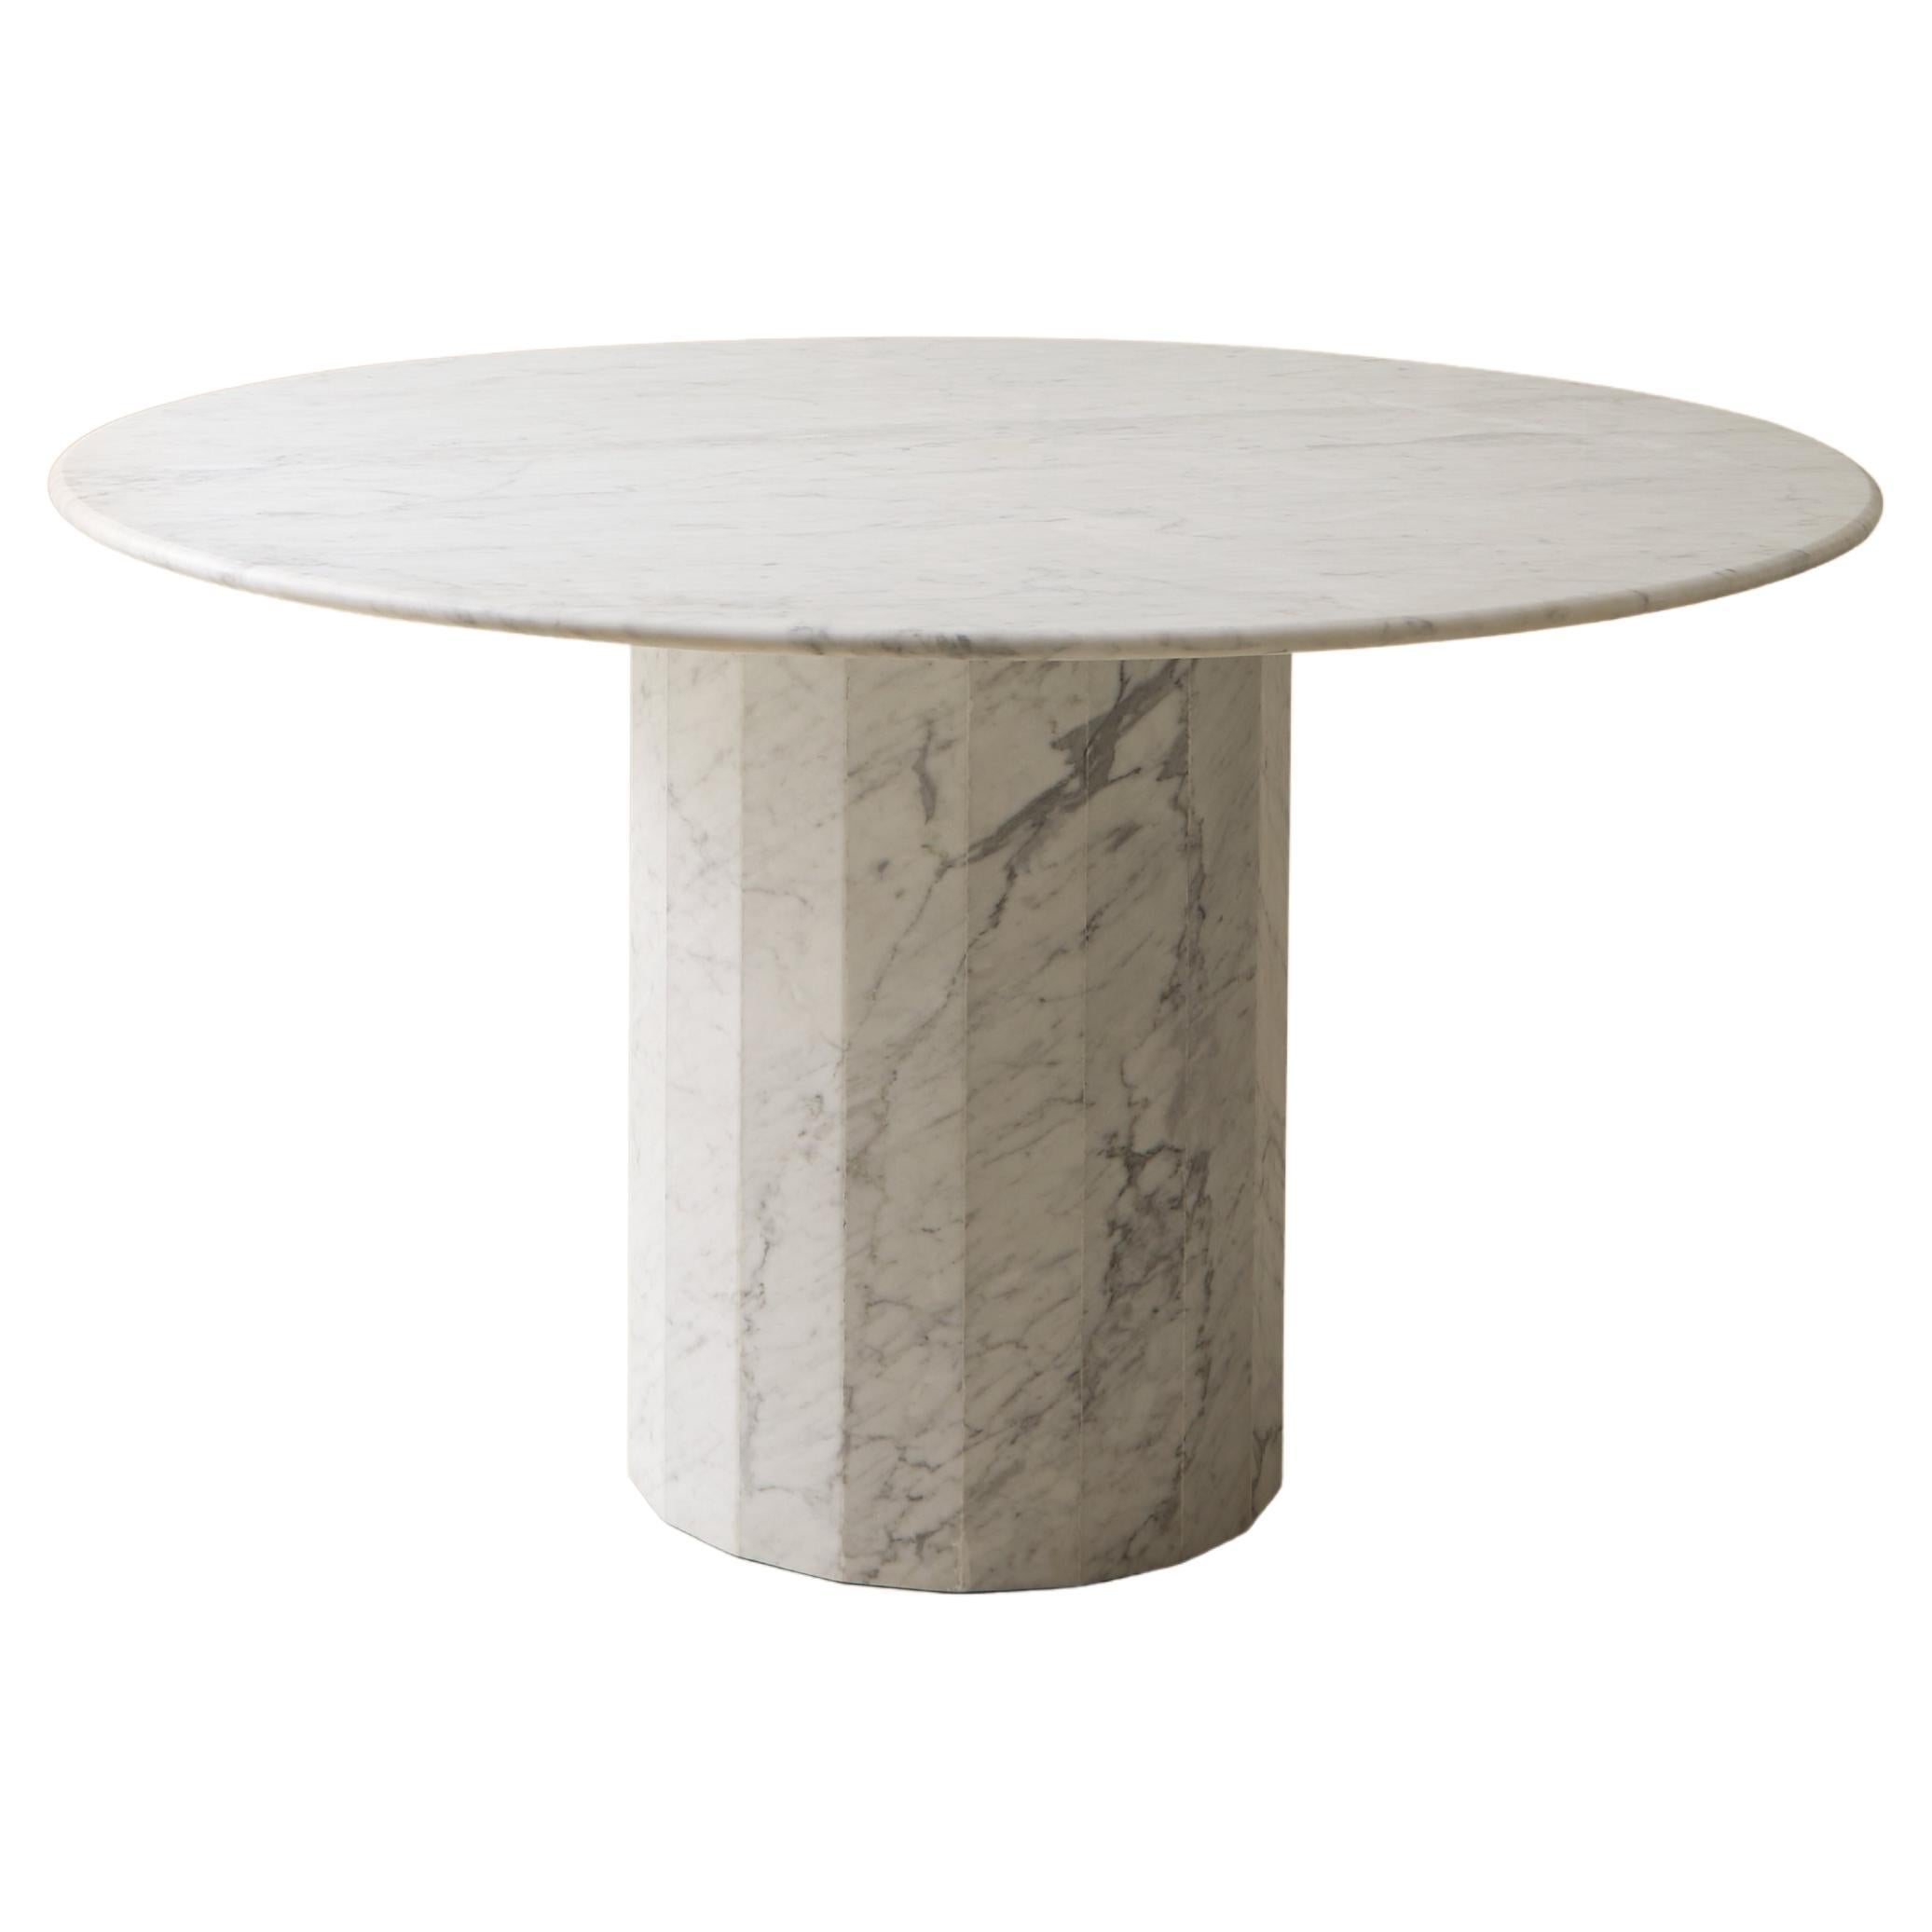 Ashby Round Dining/Hall Table Handcrafted in Honed Bianco Carrara Marble